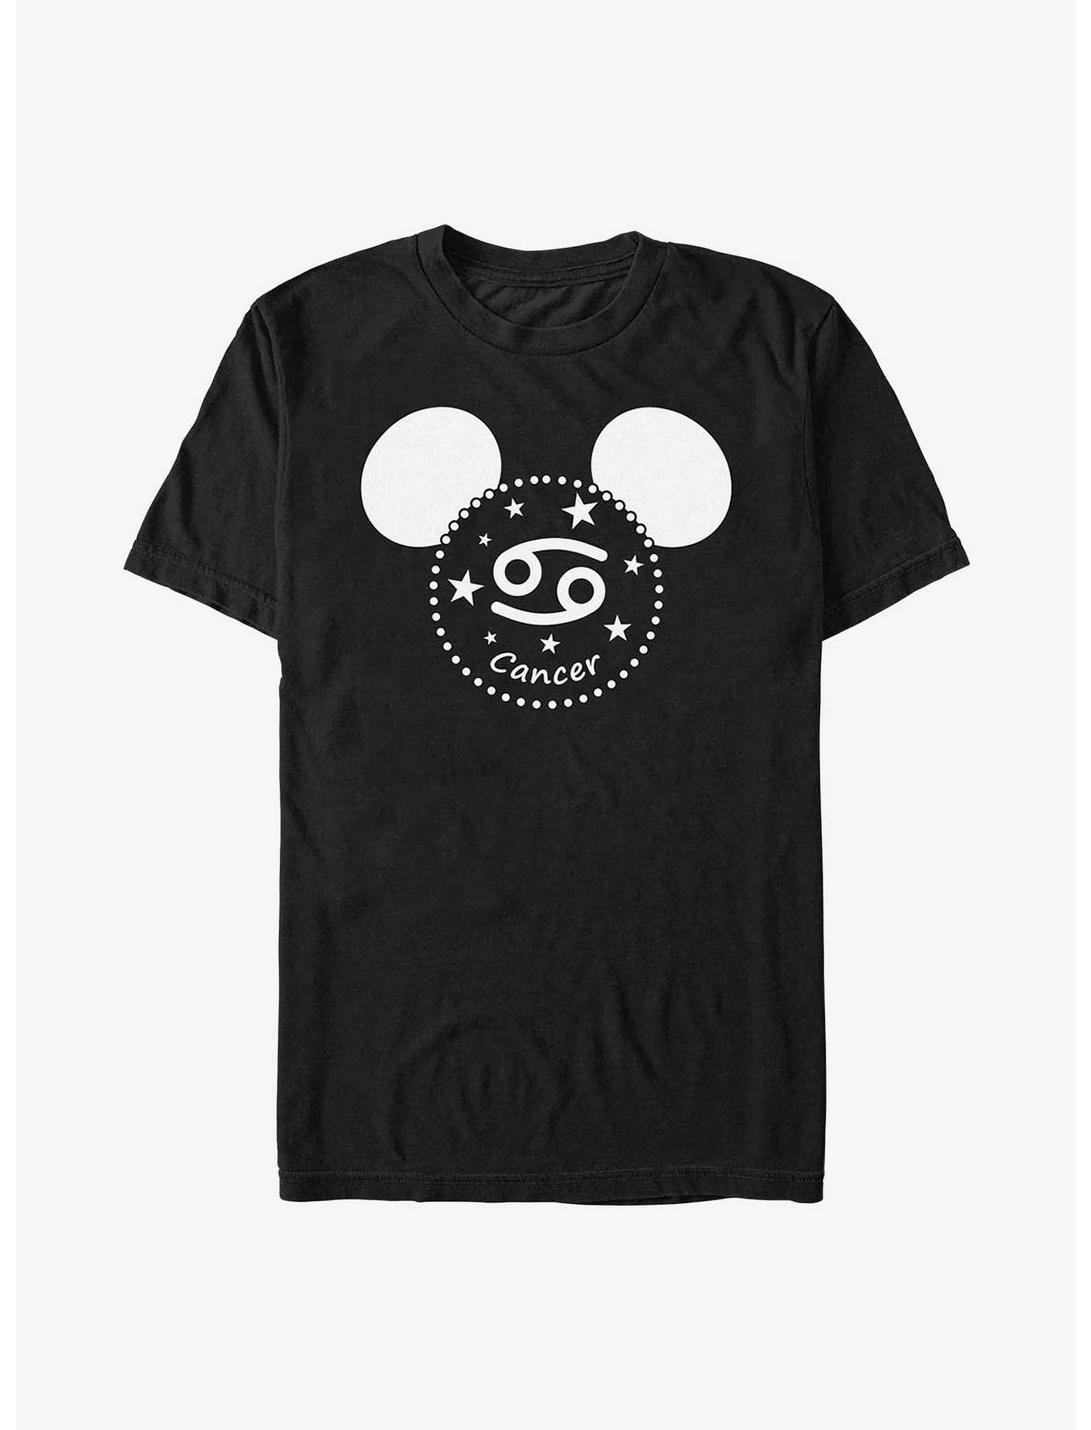 Disney Mickey Mouse Cancer Mickey Ears T-Shirt, BLACK, hi-res